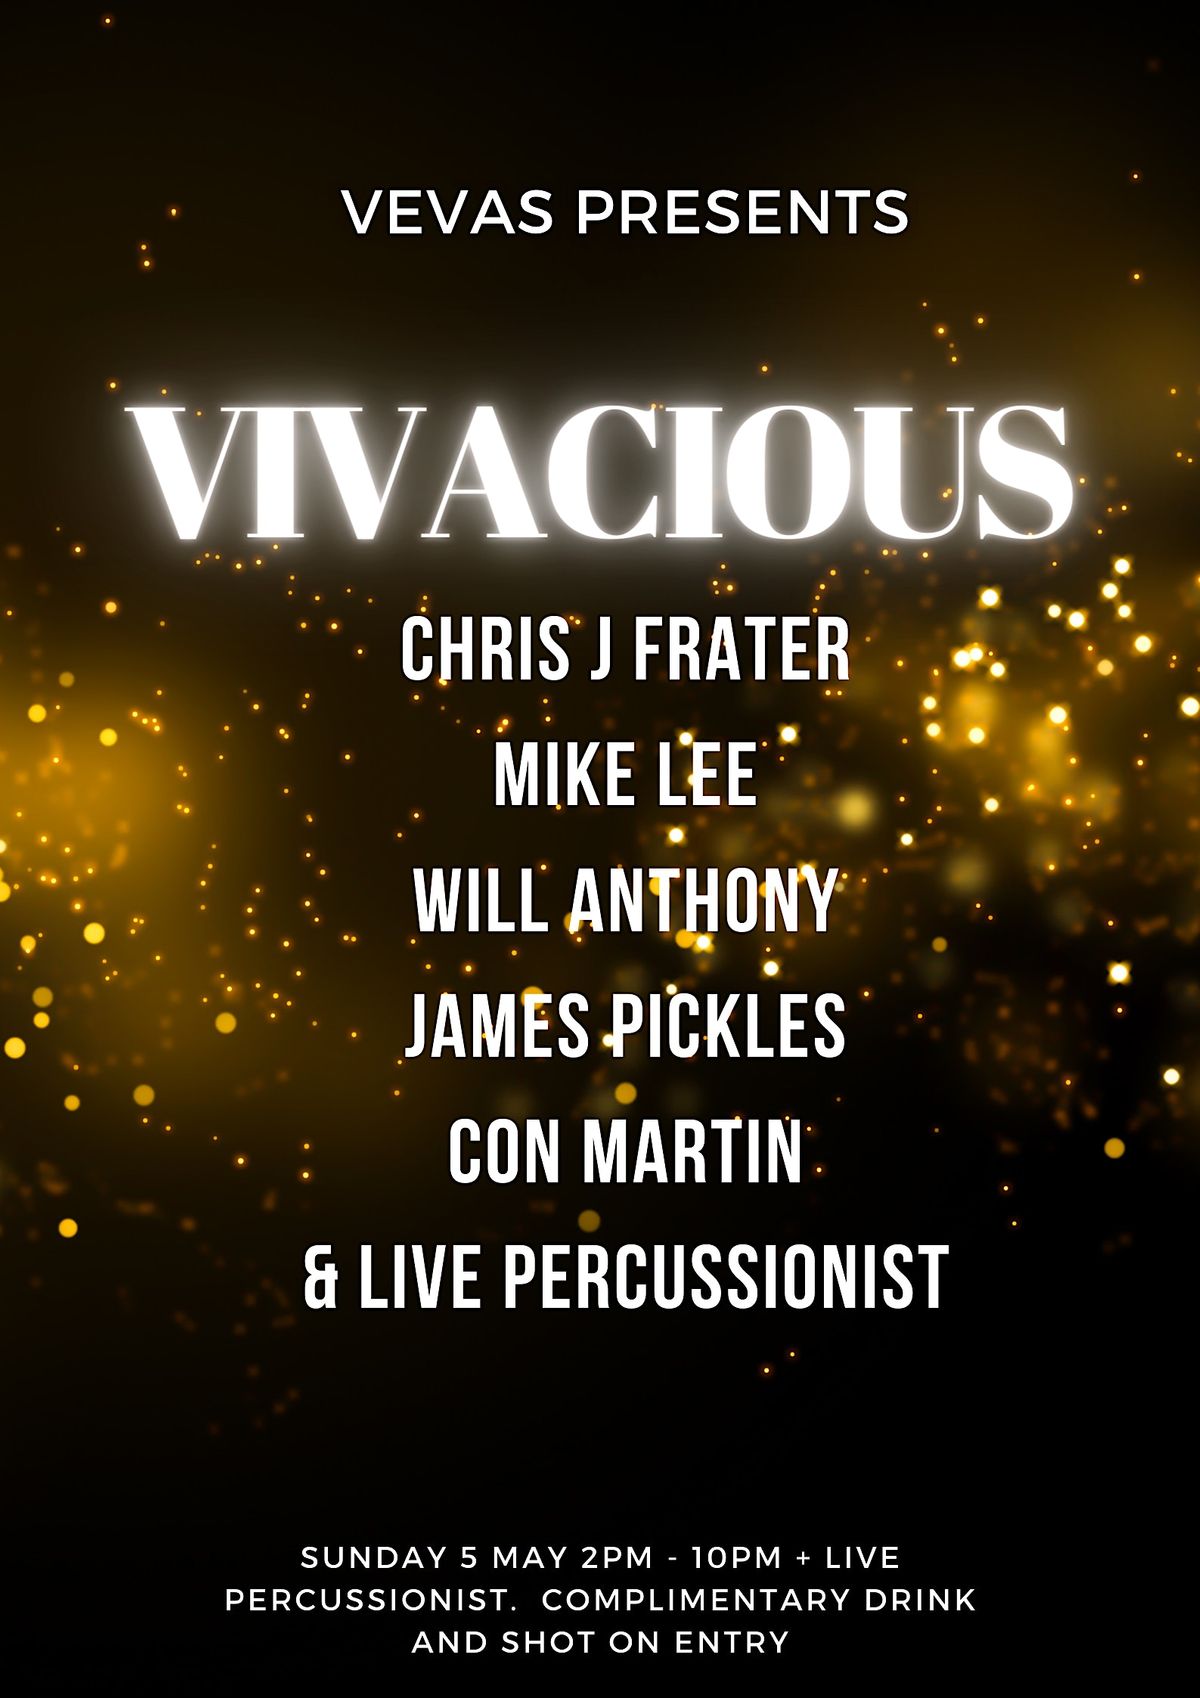 VIVACIOUS meaning ENERGETIC will play host to some of Manchesters best DJs